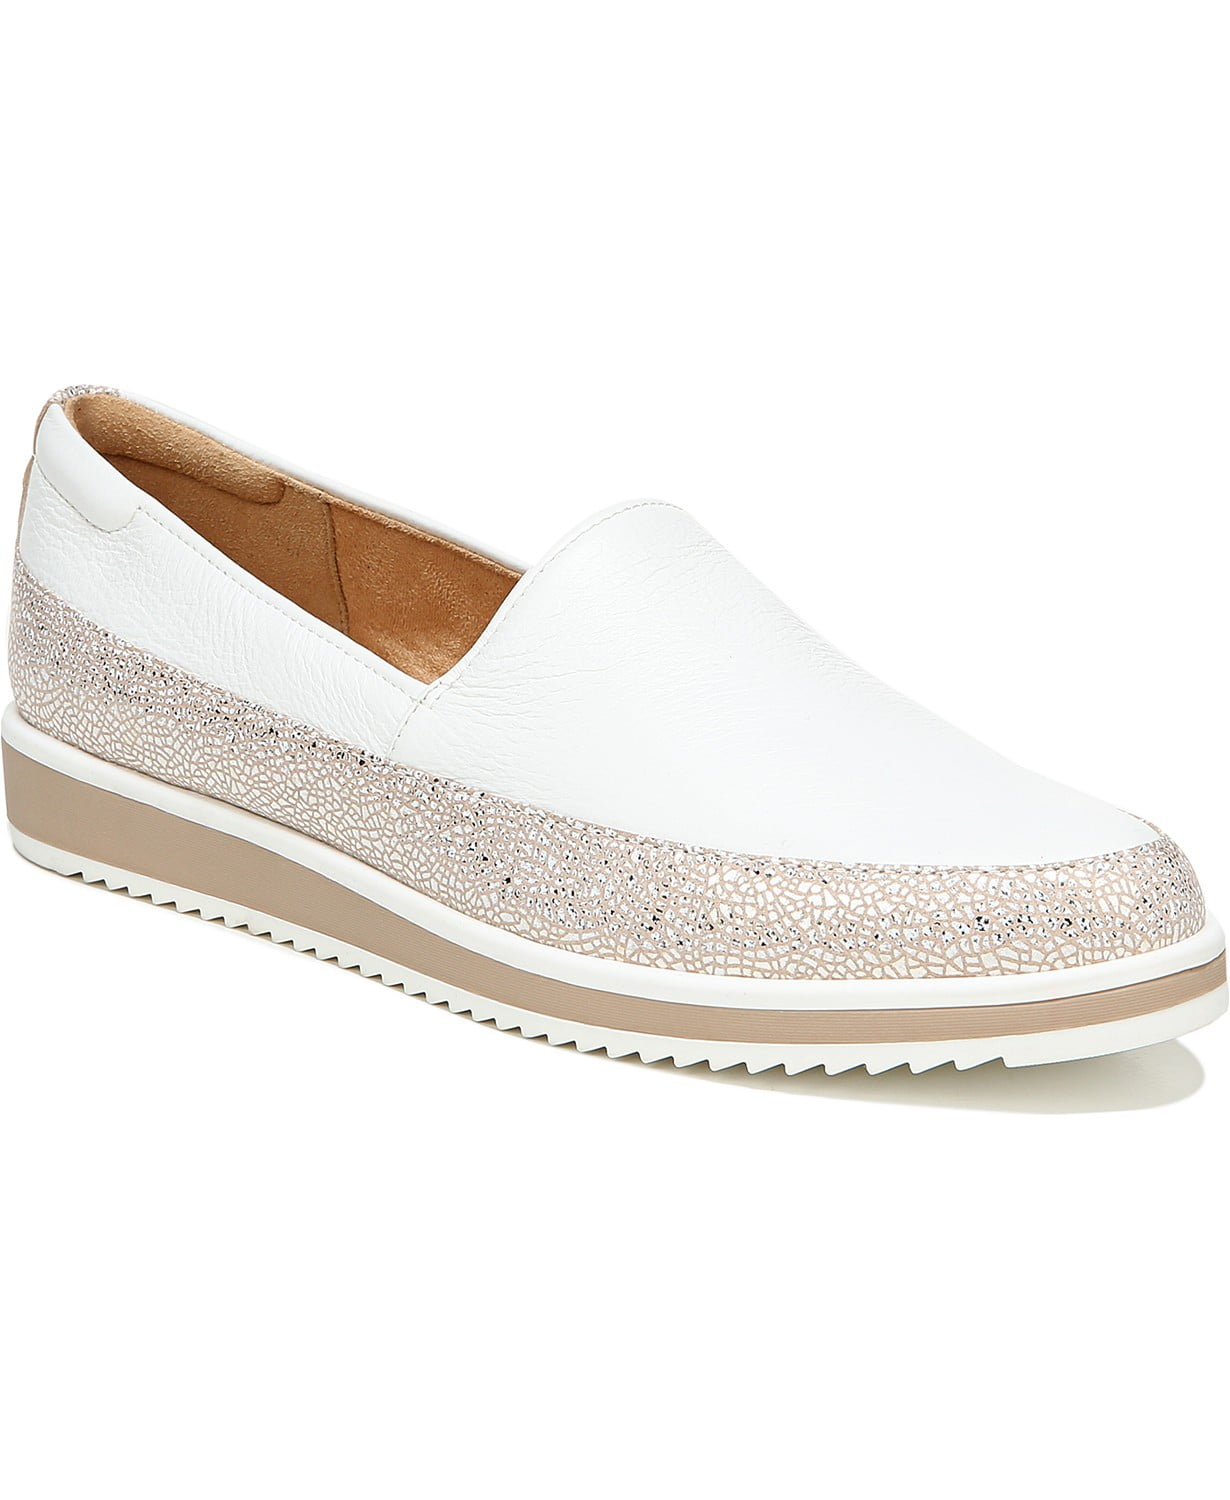 woocommerce-673321-2209615.cloudwaysapps.com-naturalizer-womens-white-crackle-leather-beale-slip-on-loafers